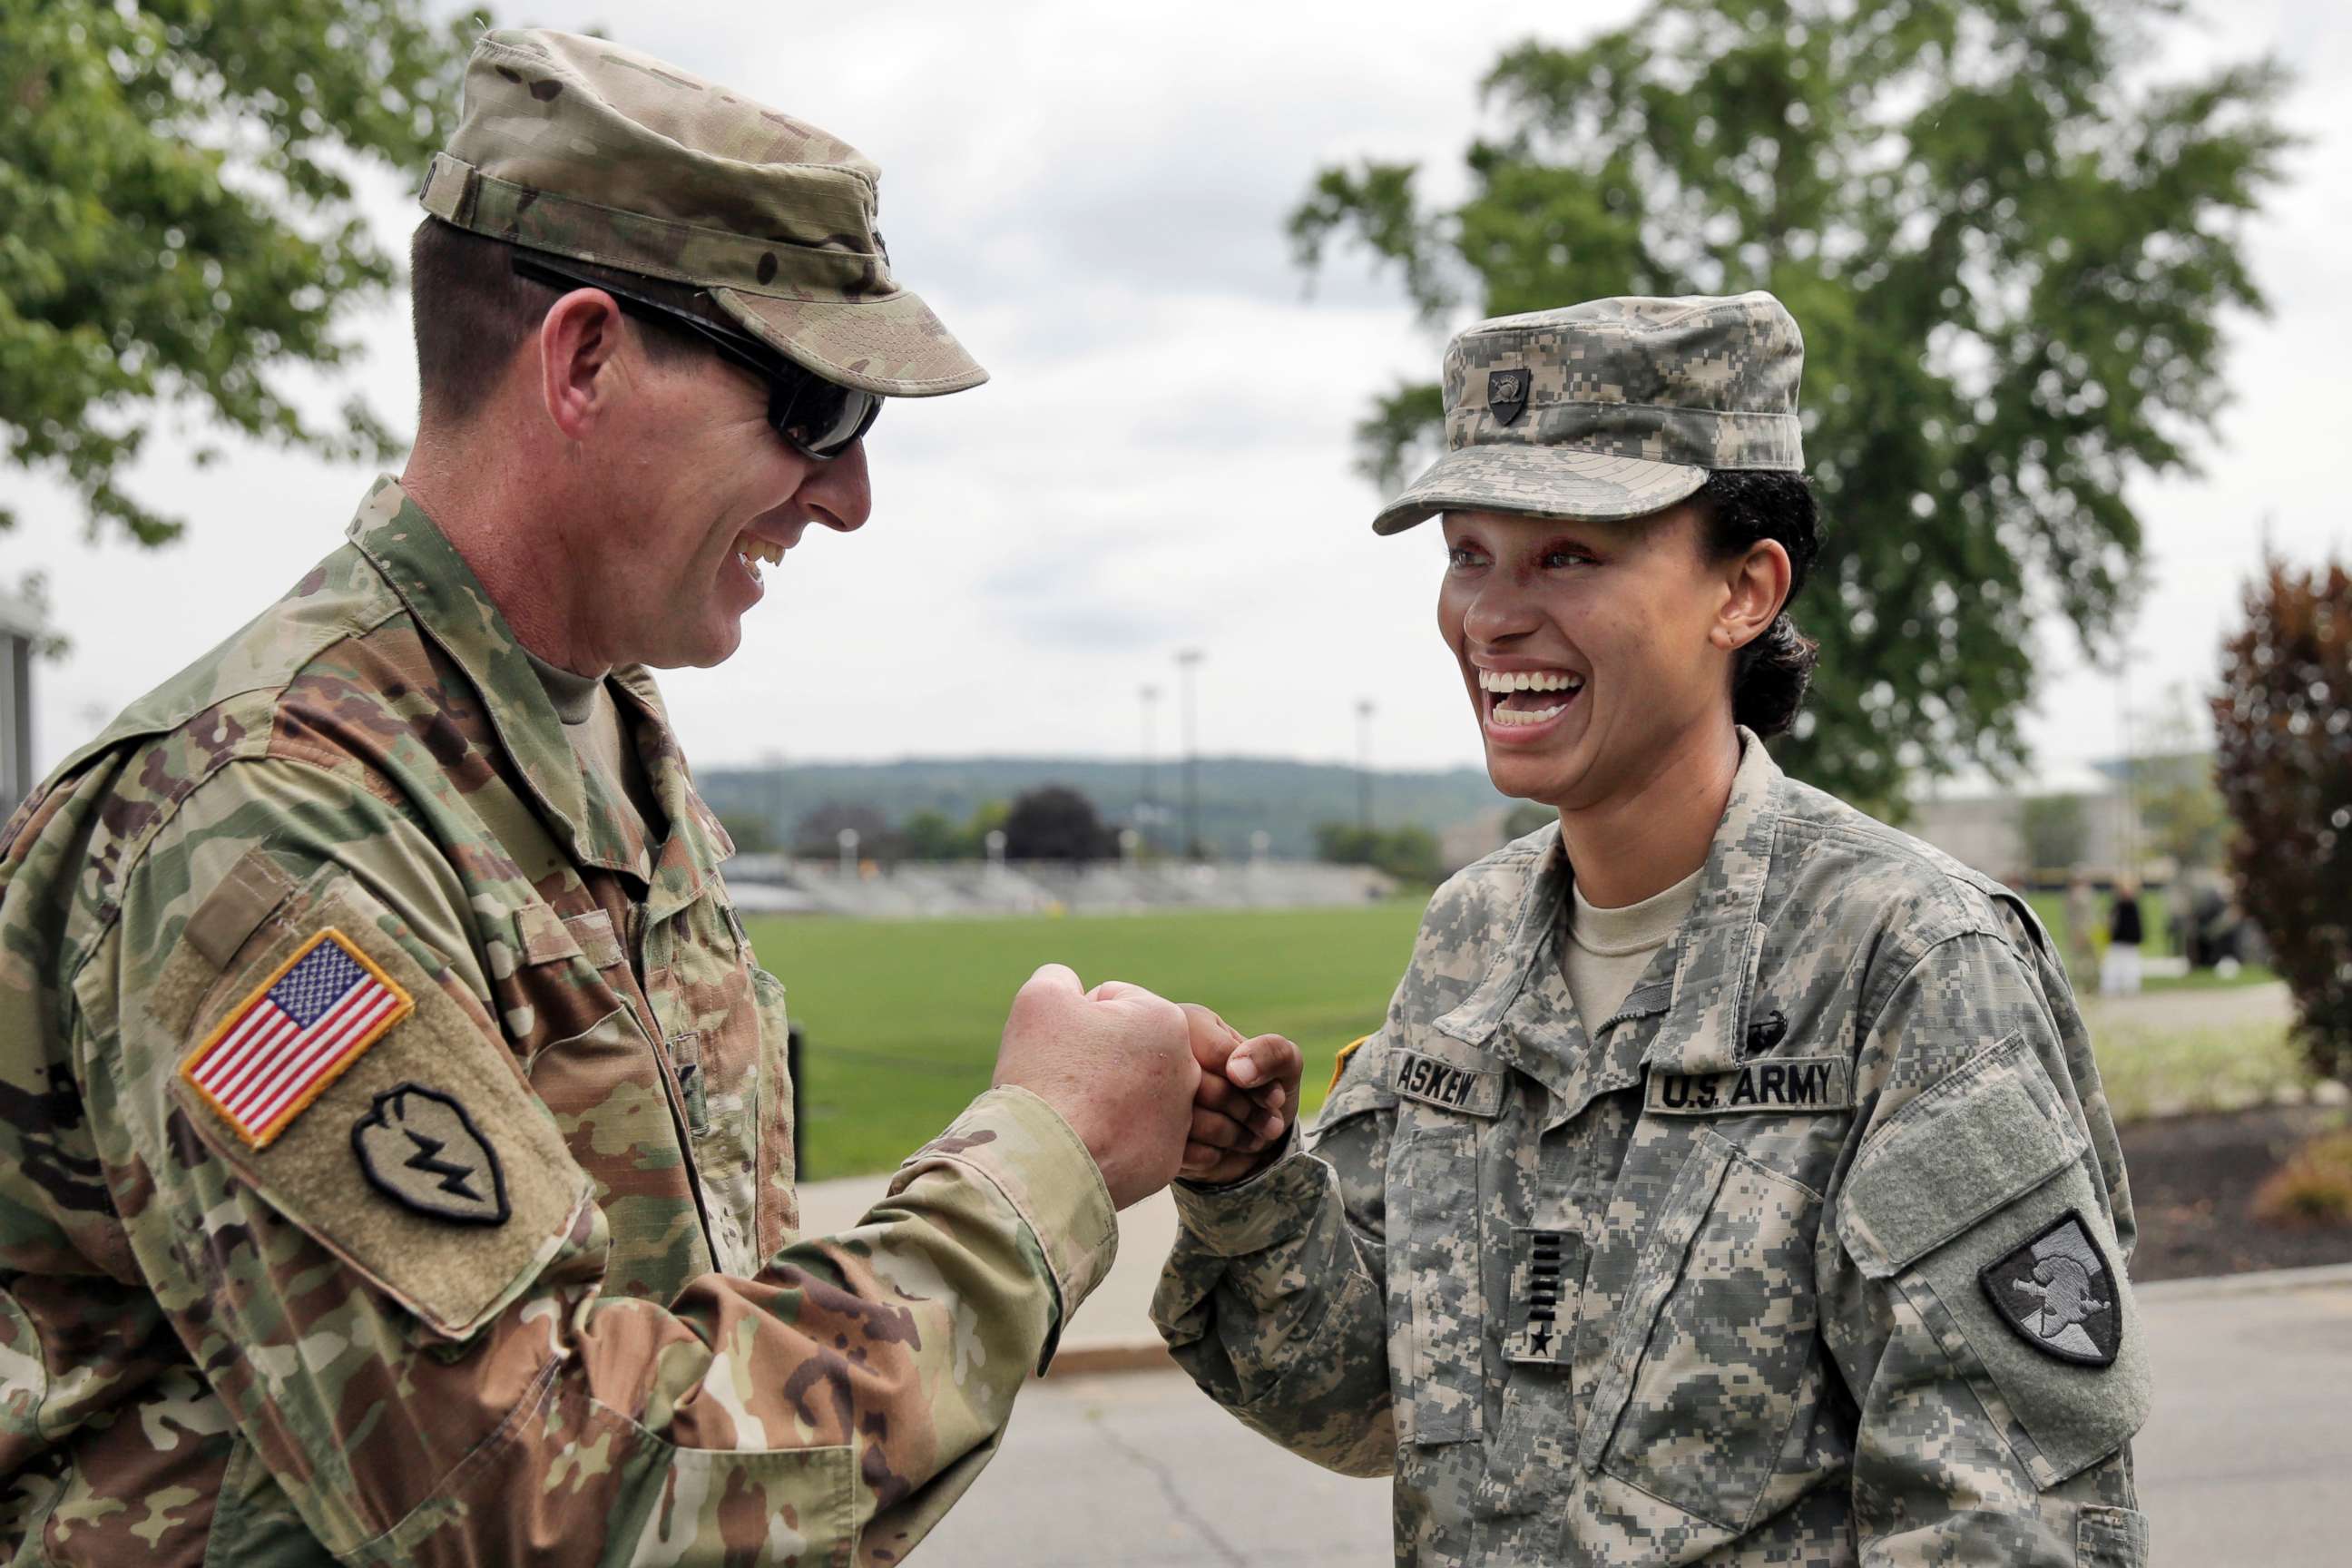 PHOTO: Cadet Simone Askew, right, talking with Brigade Tactical Officer Col. Brian Reed, has been selected first captain of the Corps of Cadets for the upcoming academic year at the U.S. Military Academy in West Point, N.Y.